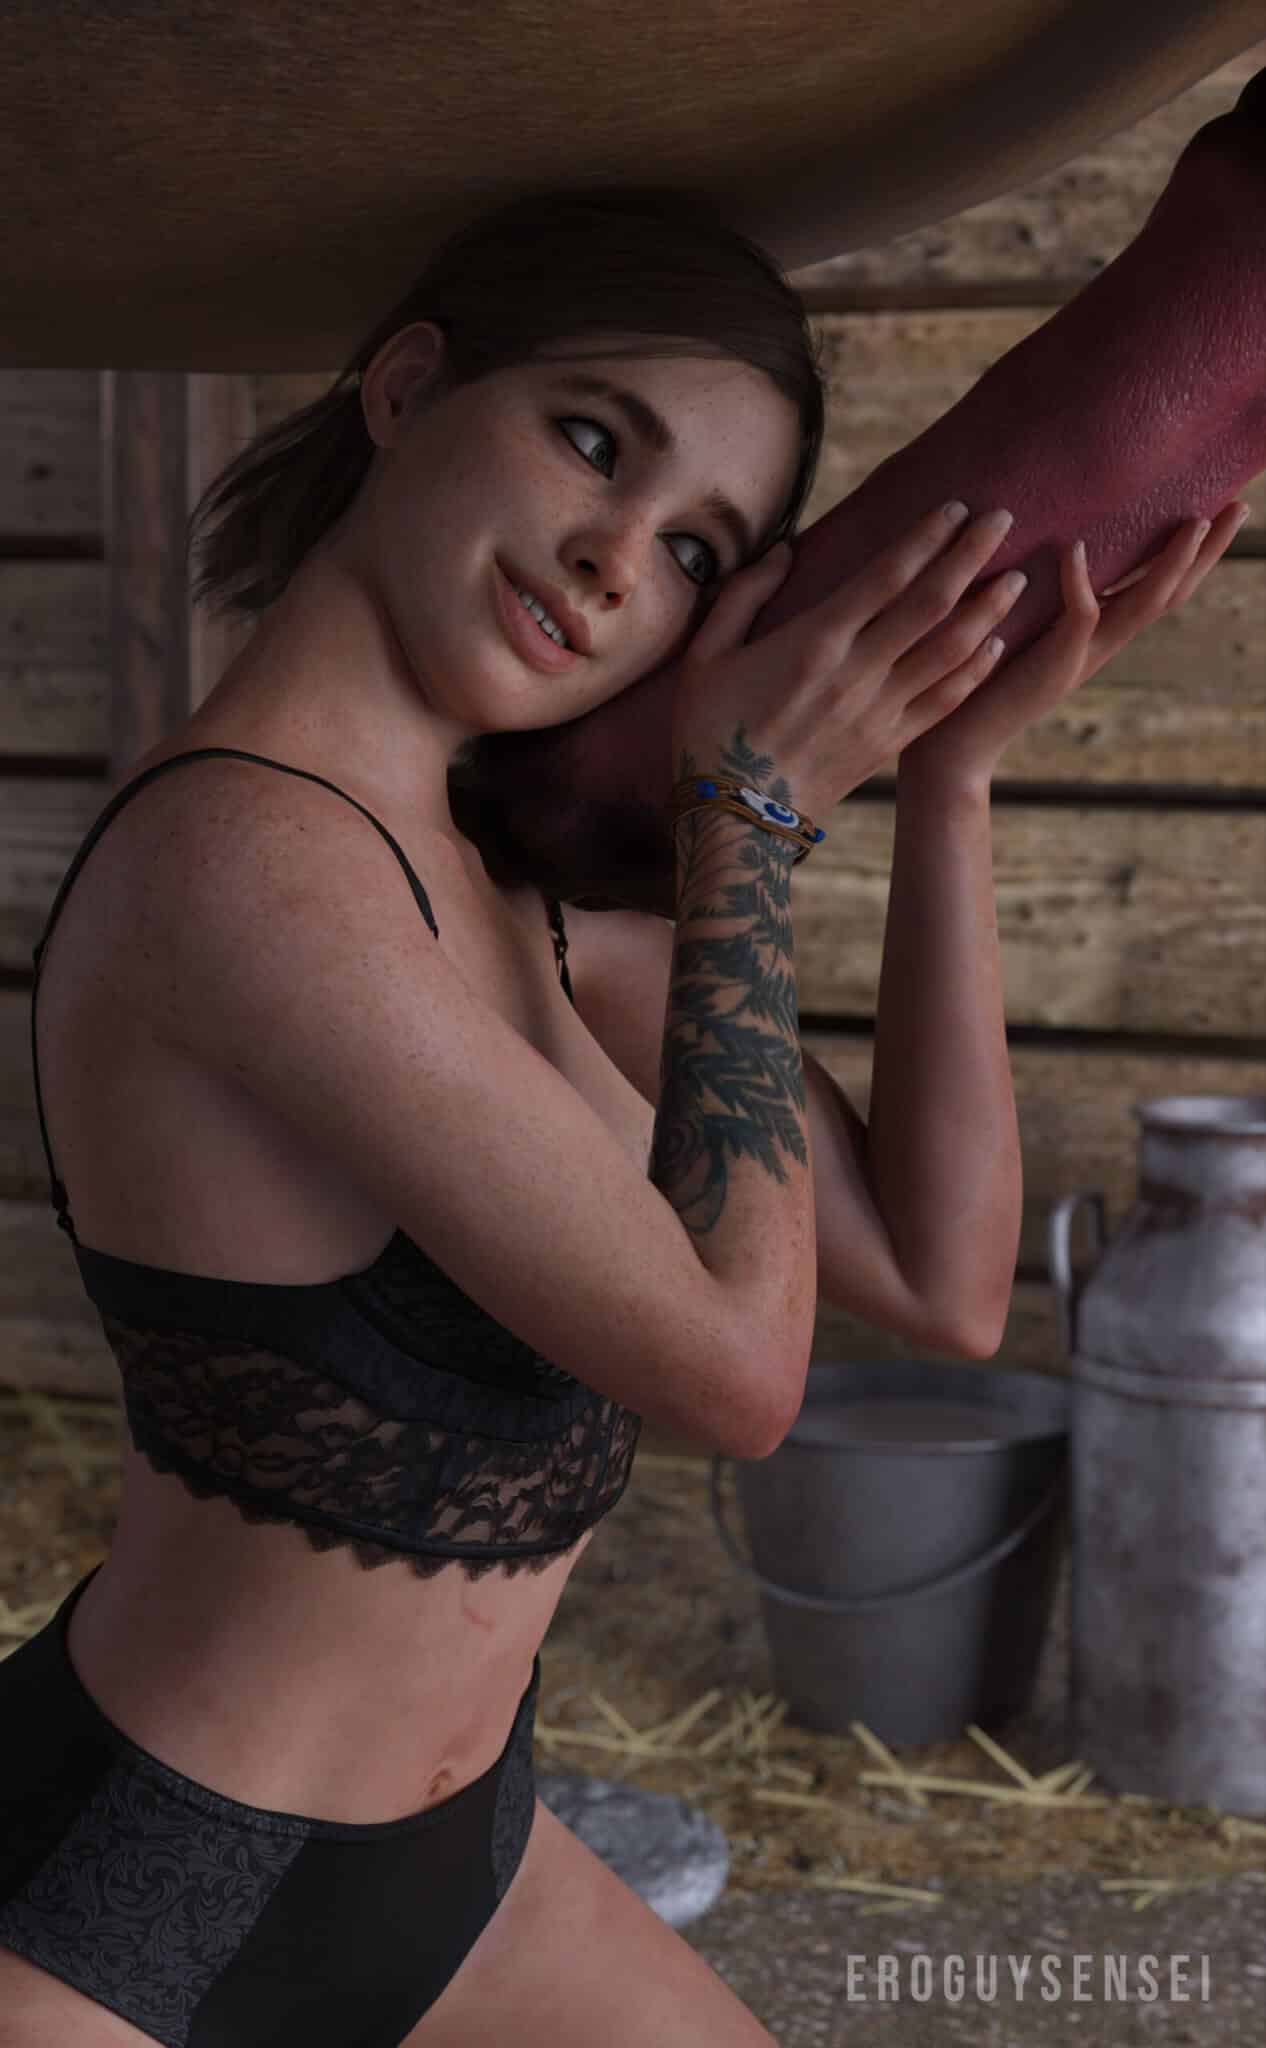 Ellie holding a horse cock in her hands while looking excited